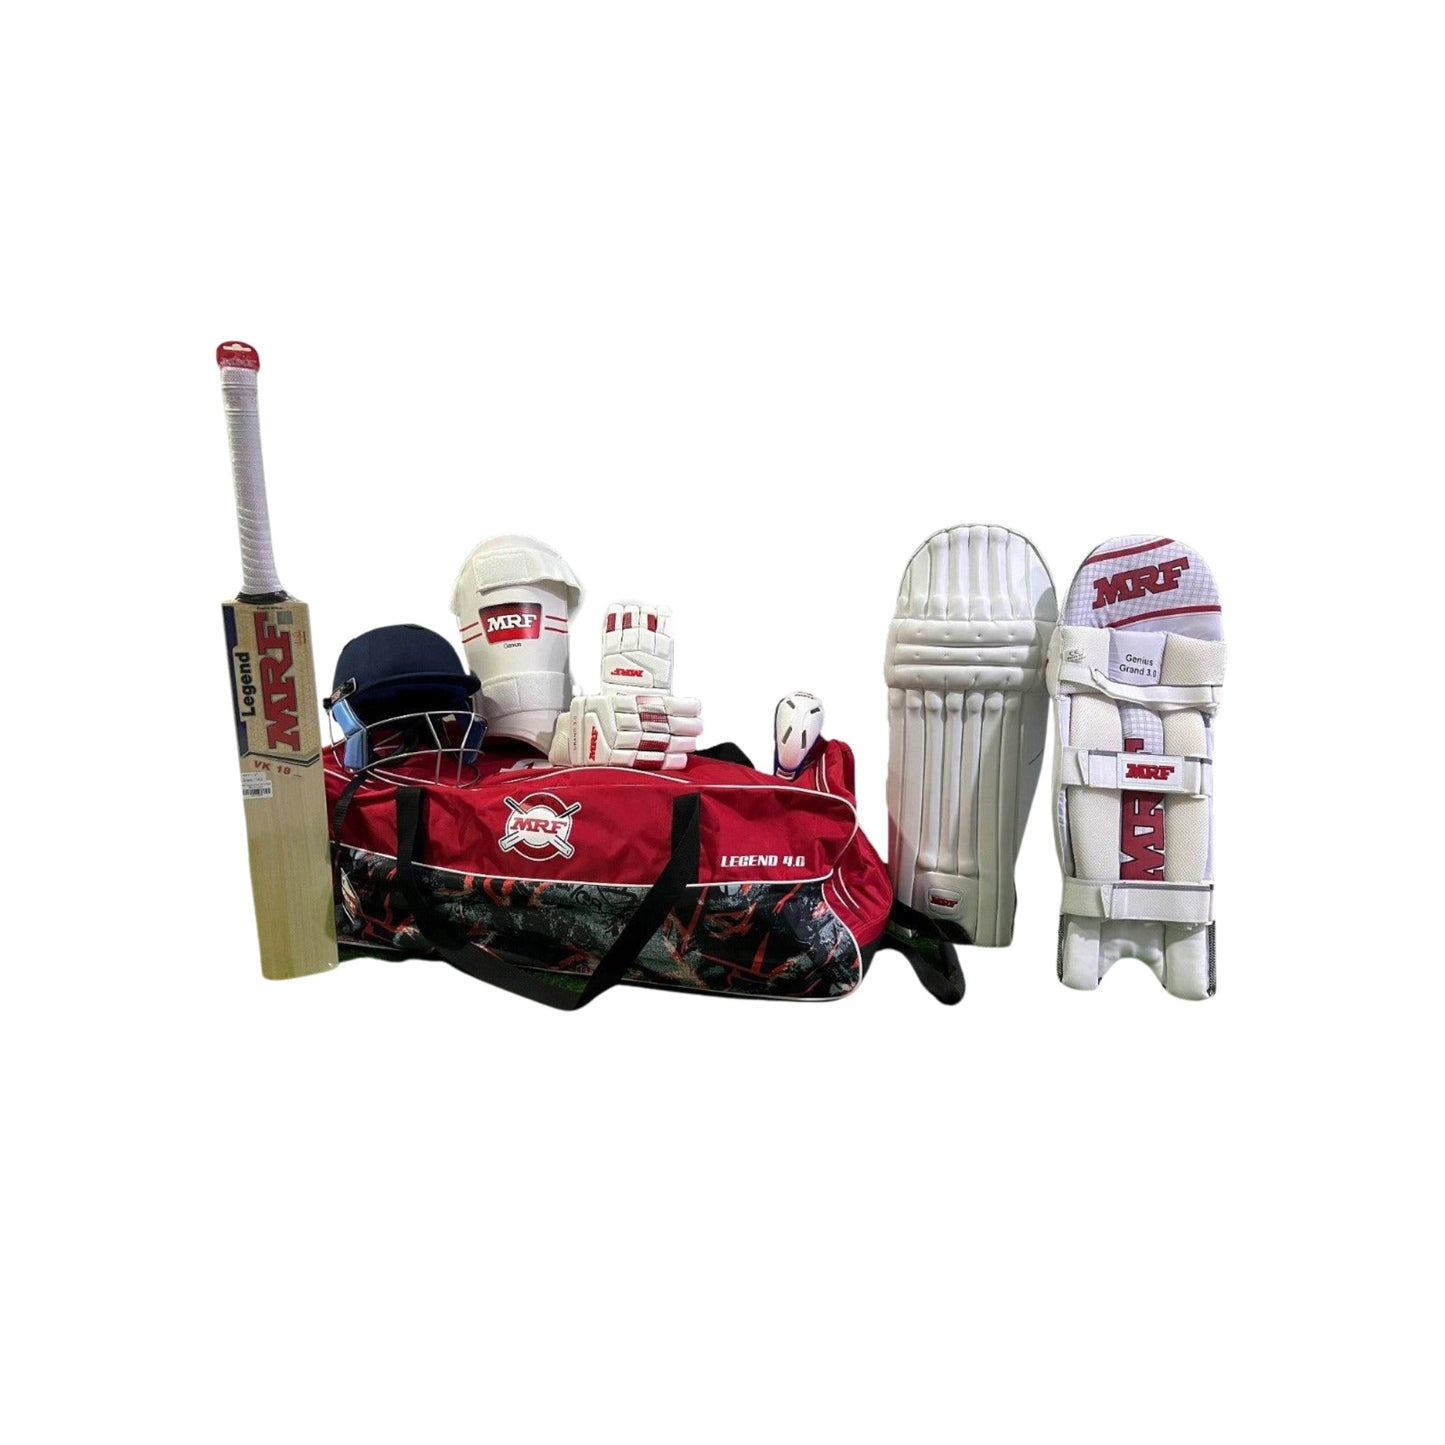 MRF English Willow Legend 4.0 Cricket Adult Kit, Complete Set with Accessories, Bat, Kit Bag, Gloves, Guards